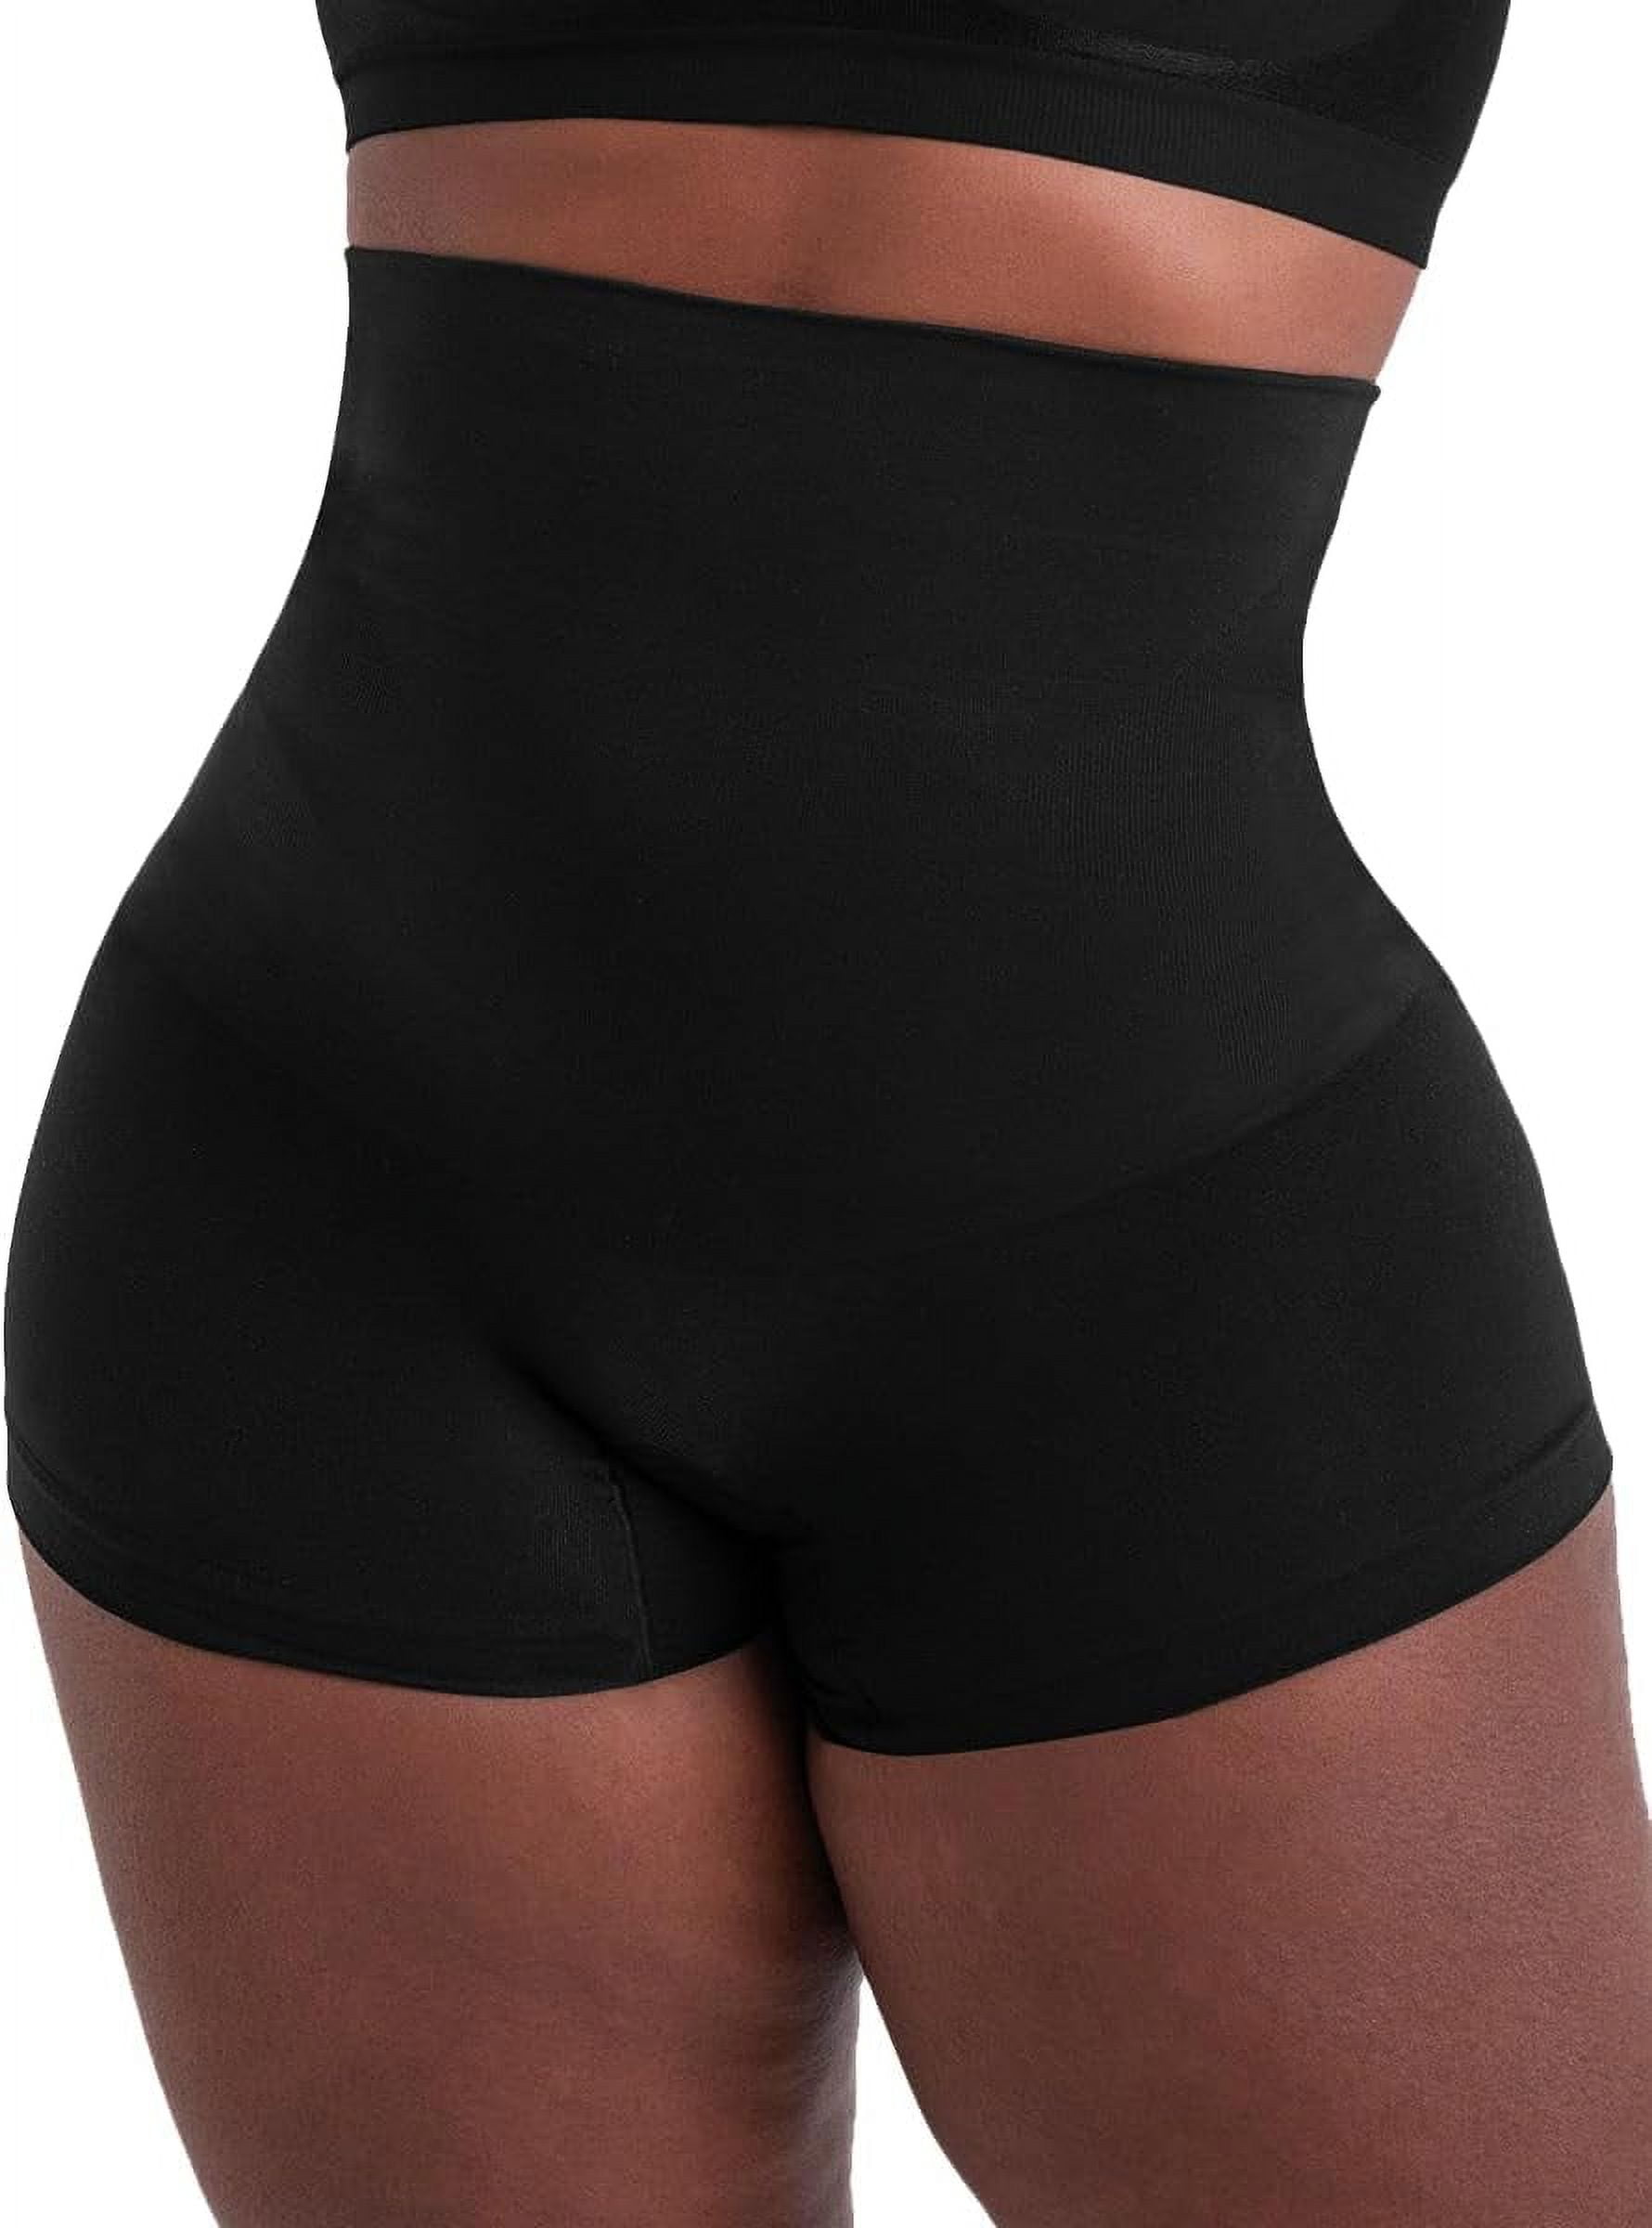 Shapermint Women's All Day Every Day High Waisted Shaper Boyshort